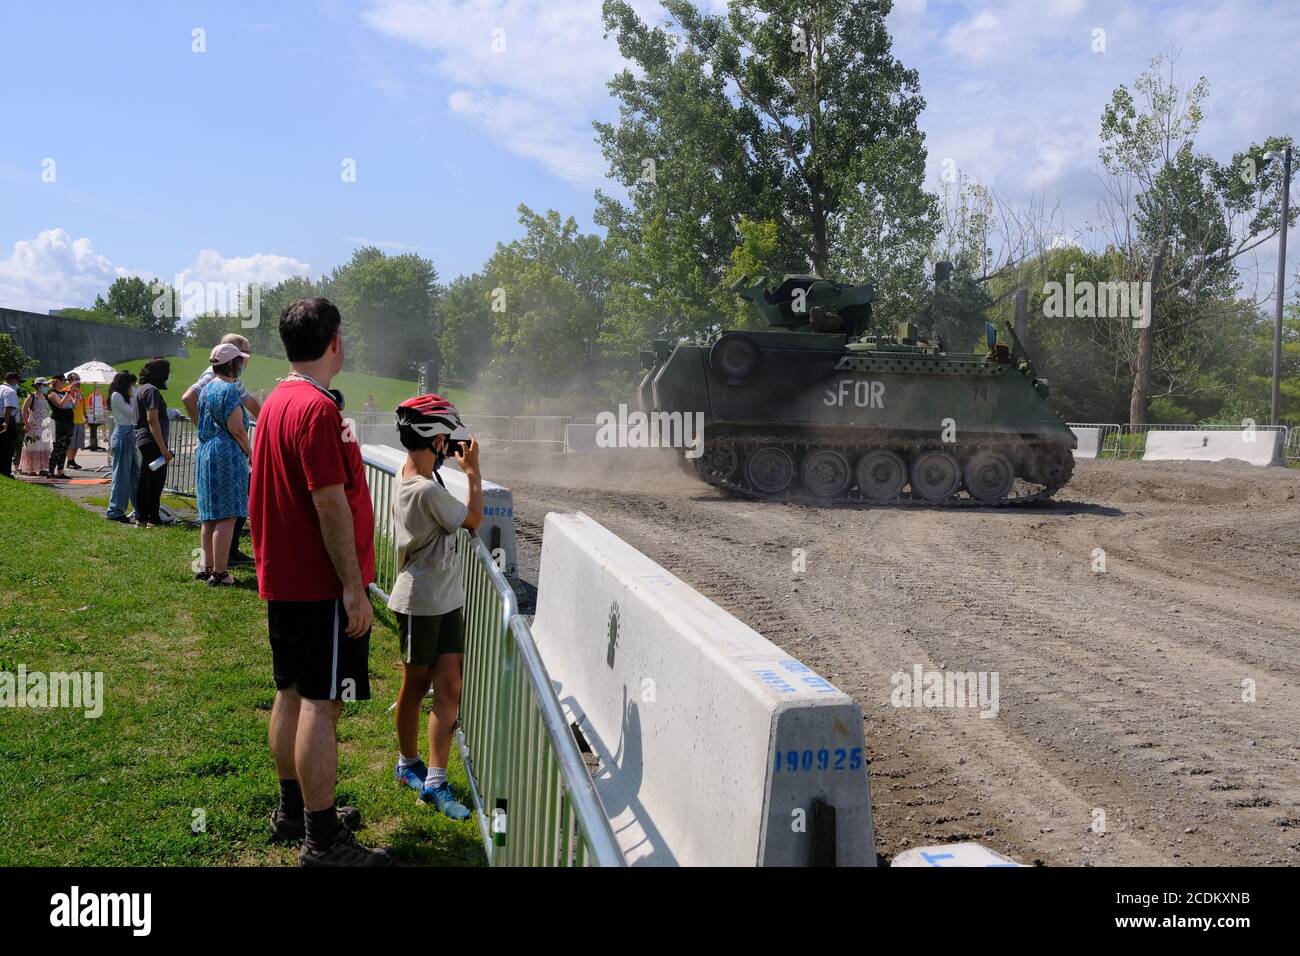 Small (COVID restricted) crowds at the free military vehicle demonstration at the Canadian War Museum, Ottawa, Ontario, Canada. Stock Photo